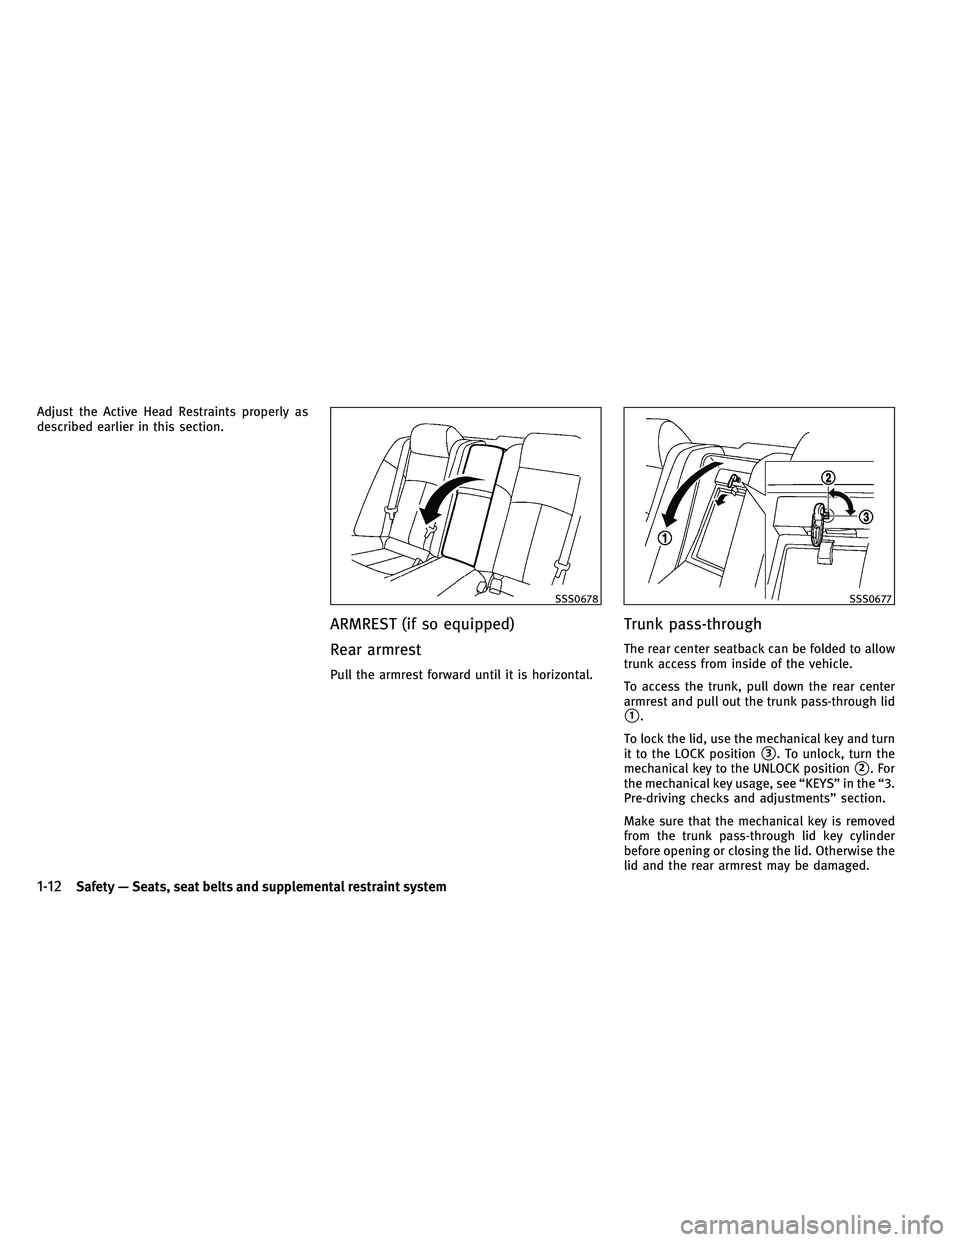 INFINITI G-COUPE 2011 Owners Guide Adjust the Active Head Restraints properly as
described earlier in this section.
ARMREST (if so equipped)
Rear armrest
Pull the armrest forward until it is horizontal.
Trunk pass-through
The rear cent